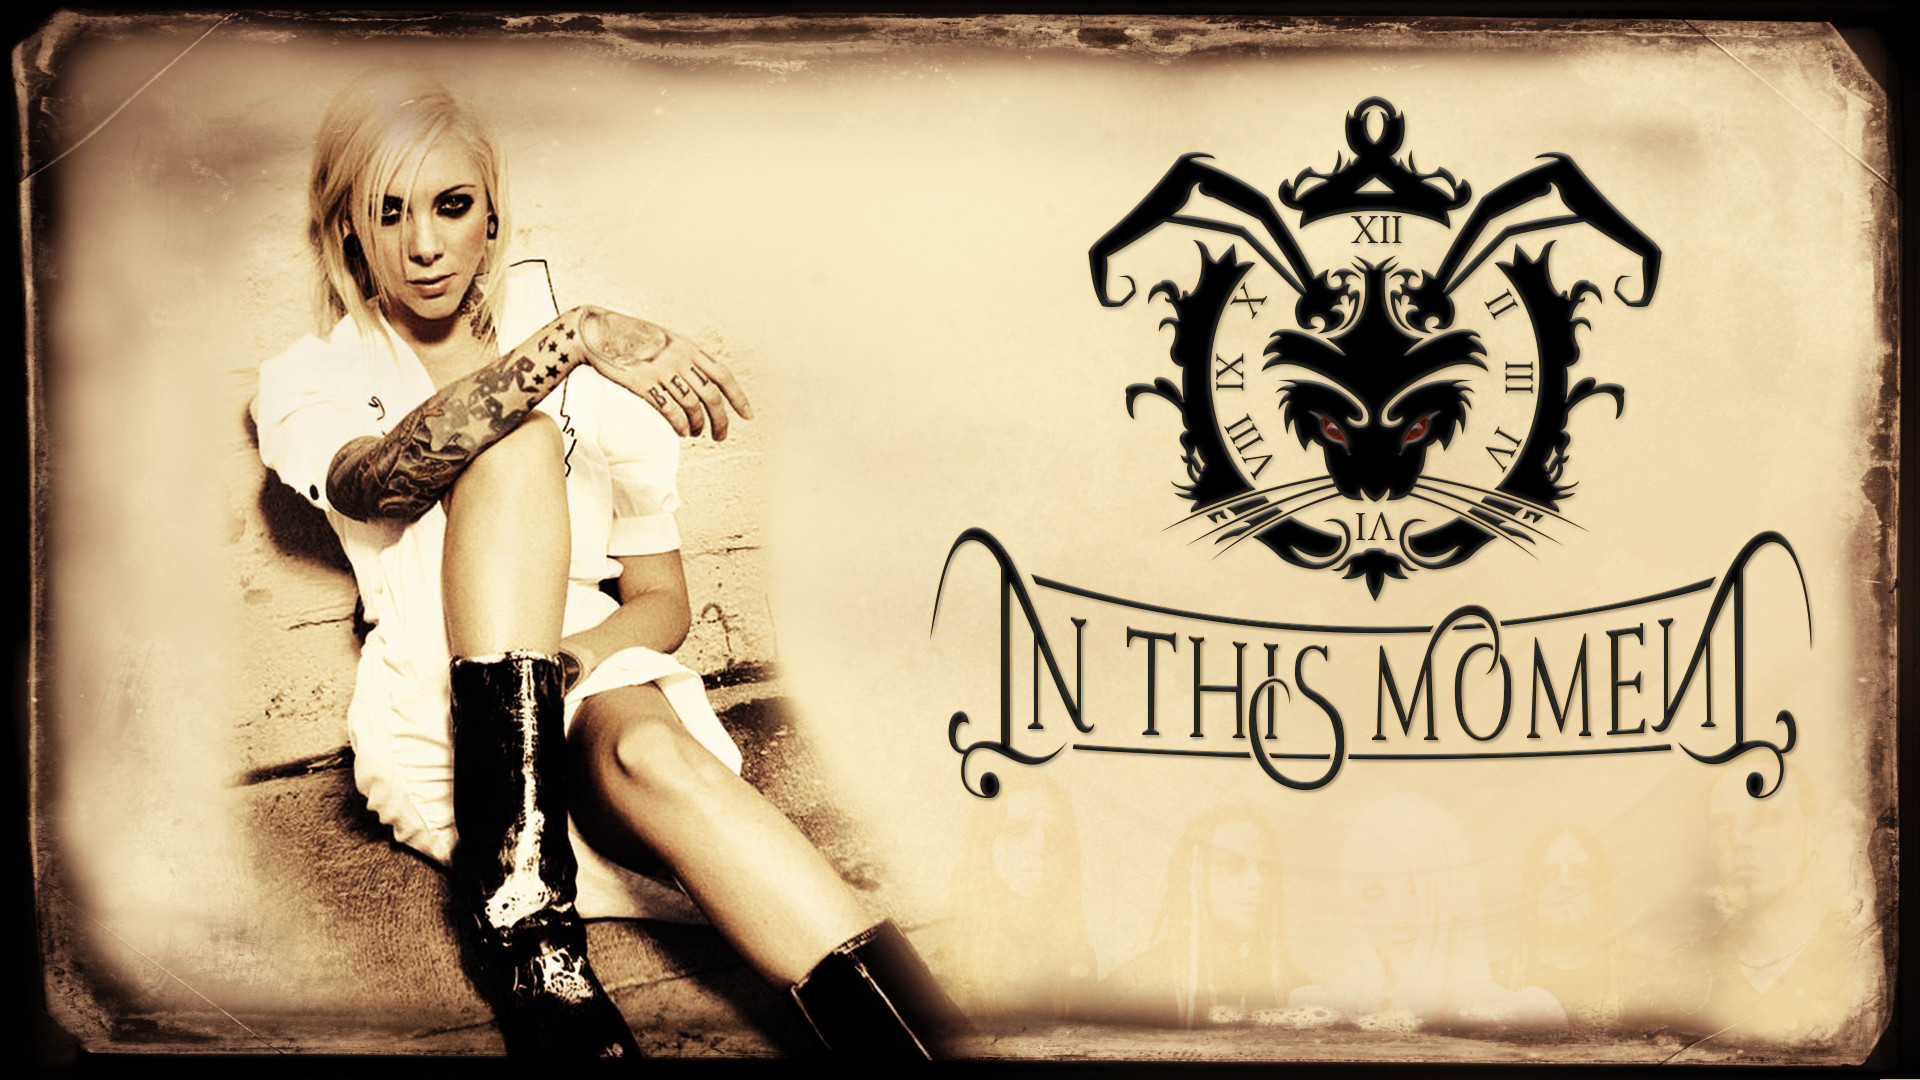 1920x1080 ... In This Moment (Music Band) Desigm by Azazelfire